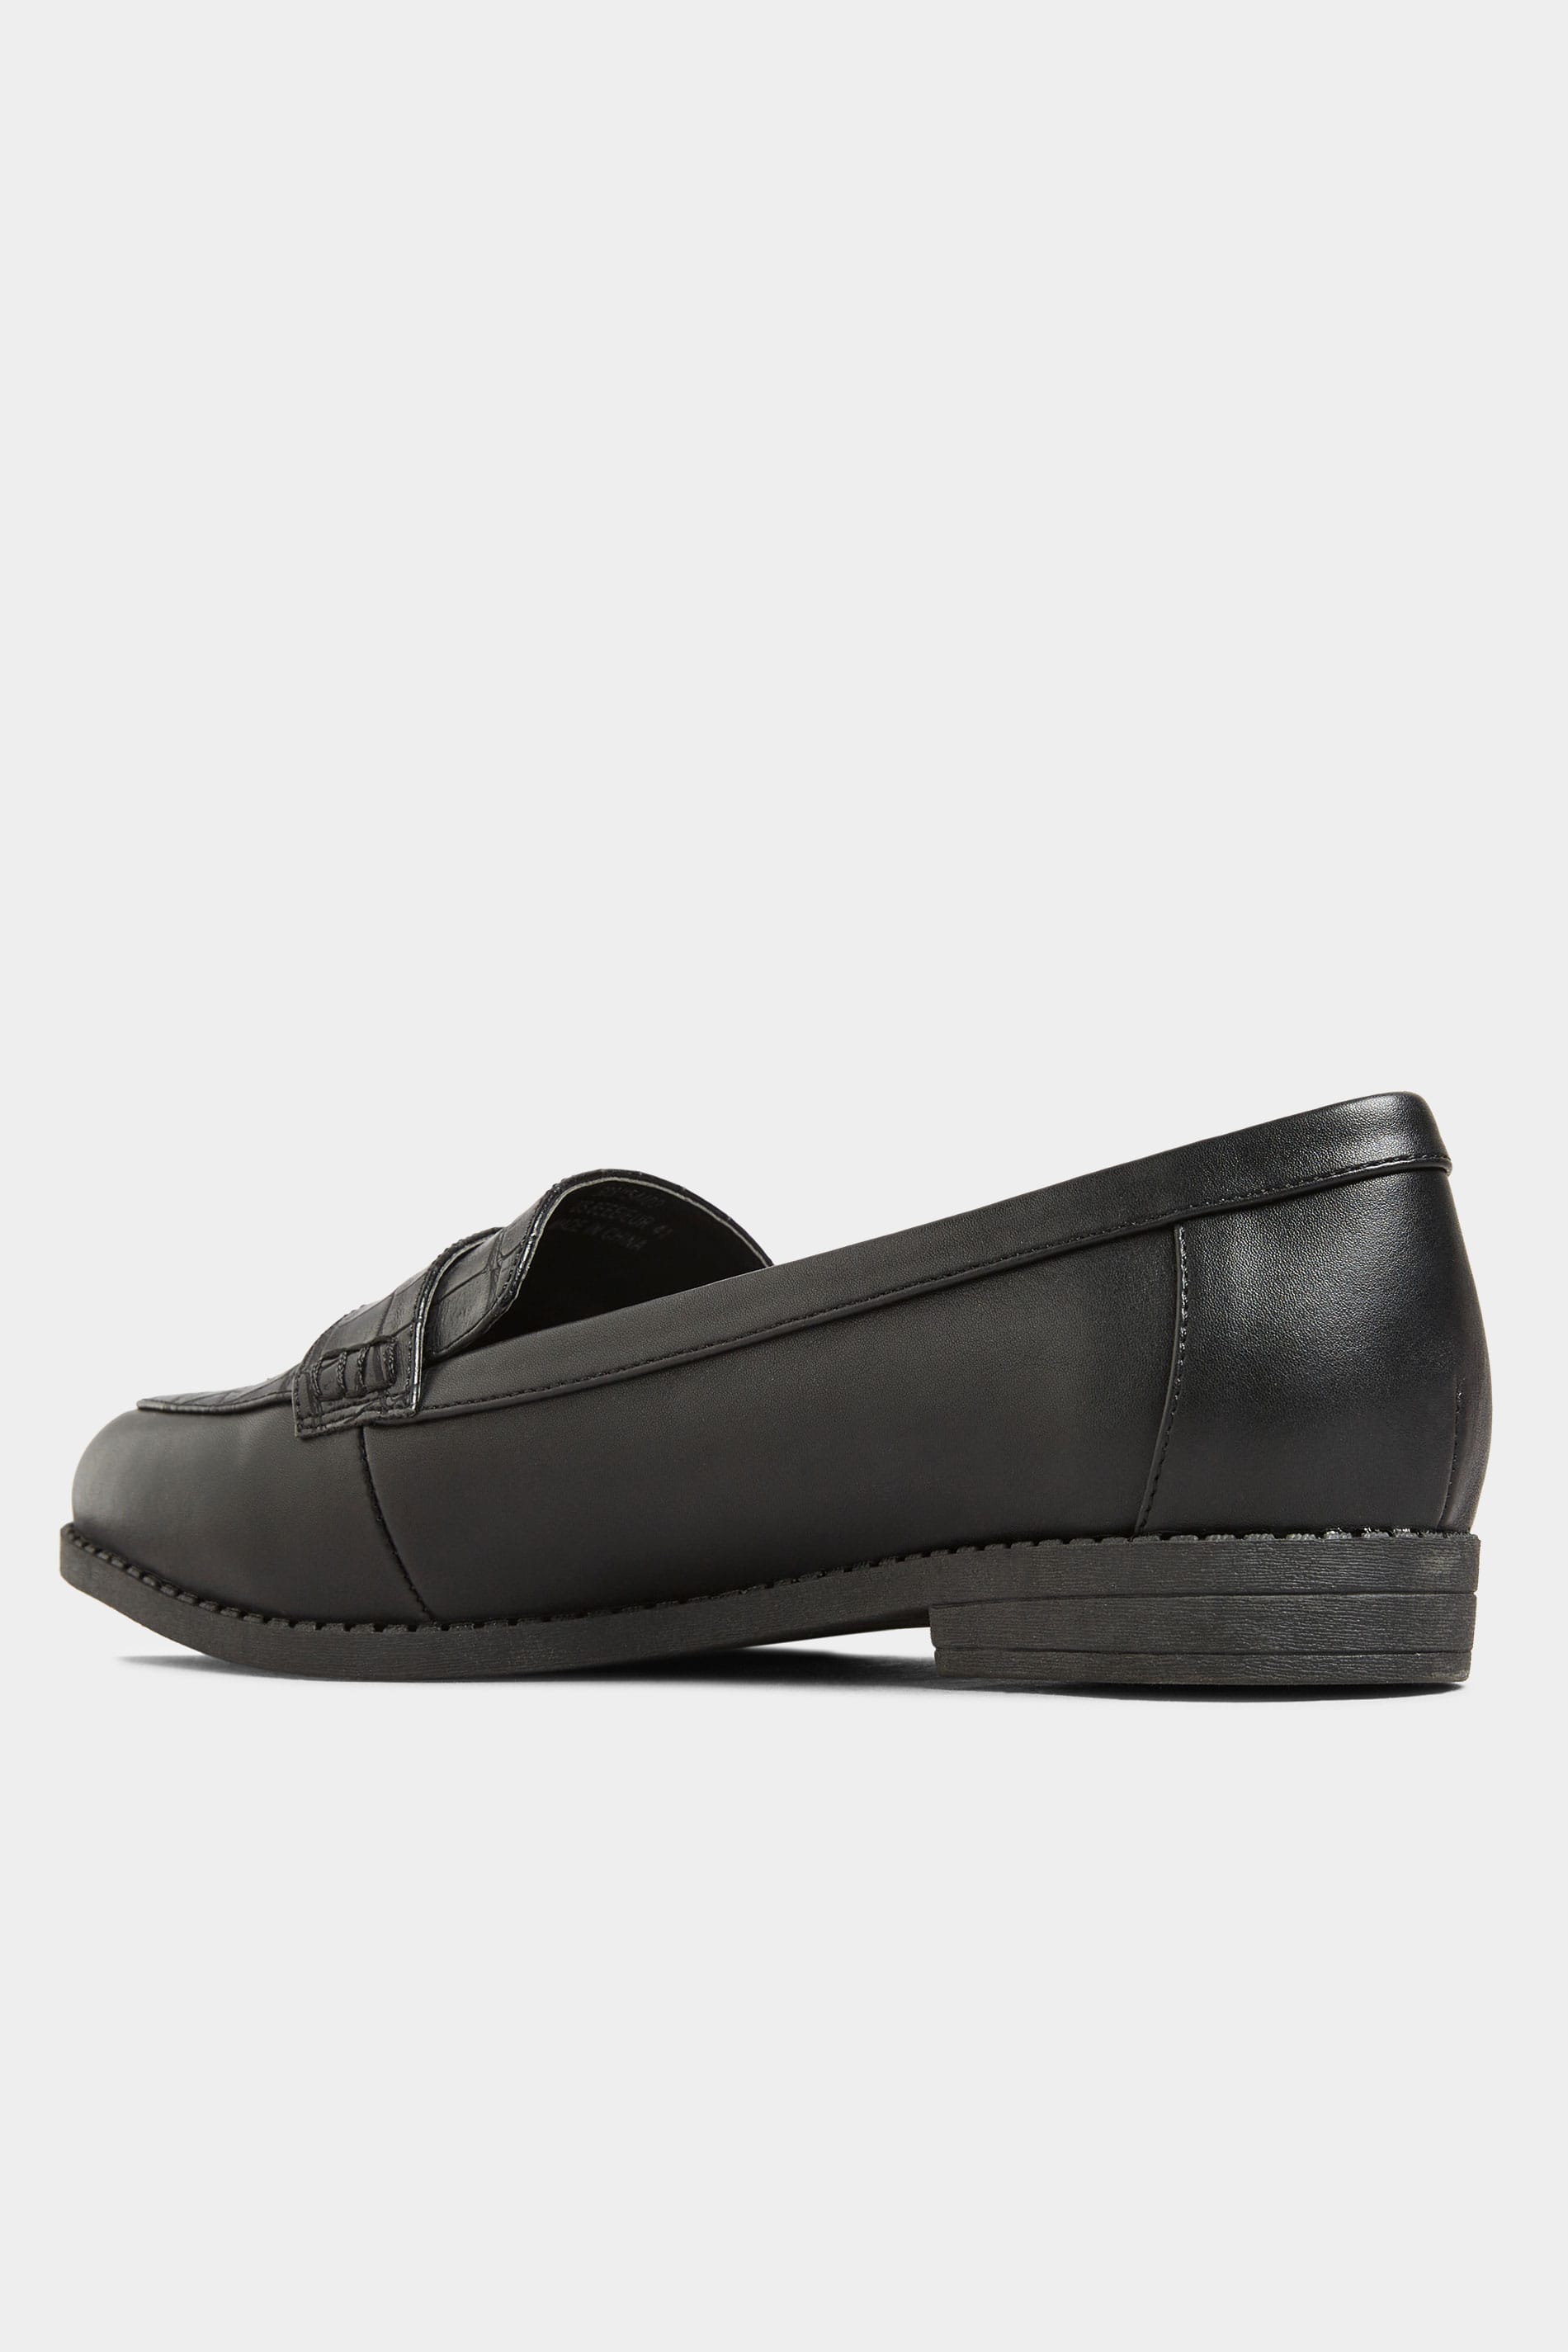 Black Croc Loafers In Extra Wide Fit | Long Tall Sally